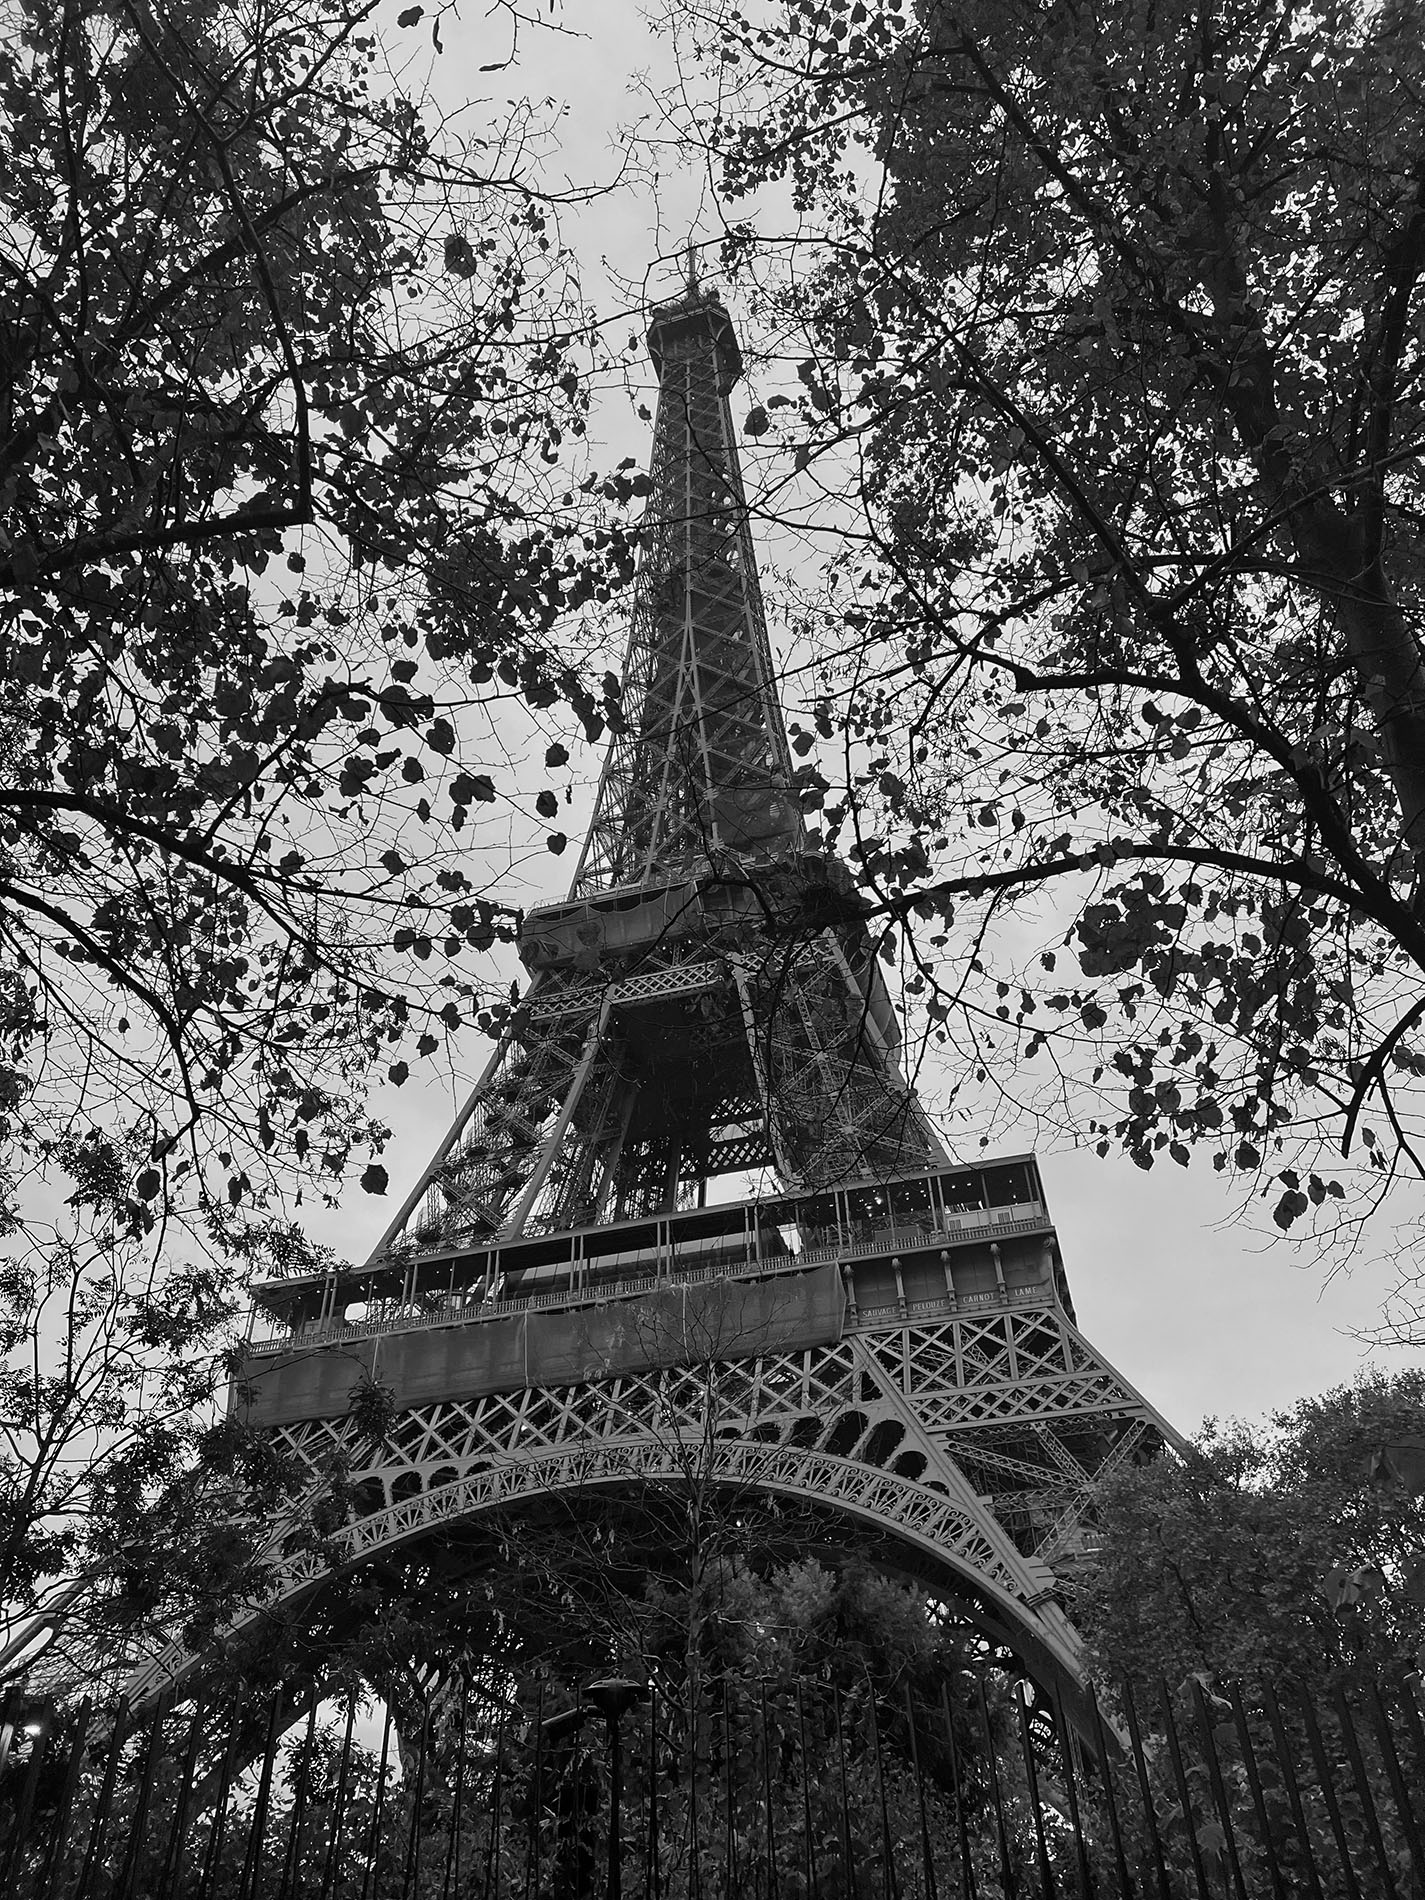 Black and white photo near the base of the Eiffel tower looking up through the trees at the top